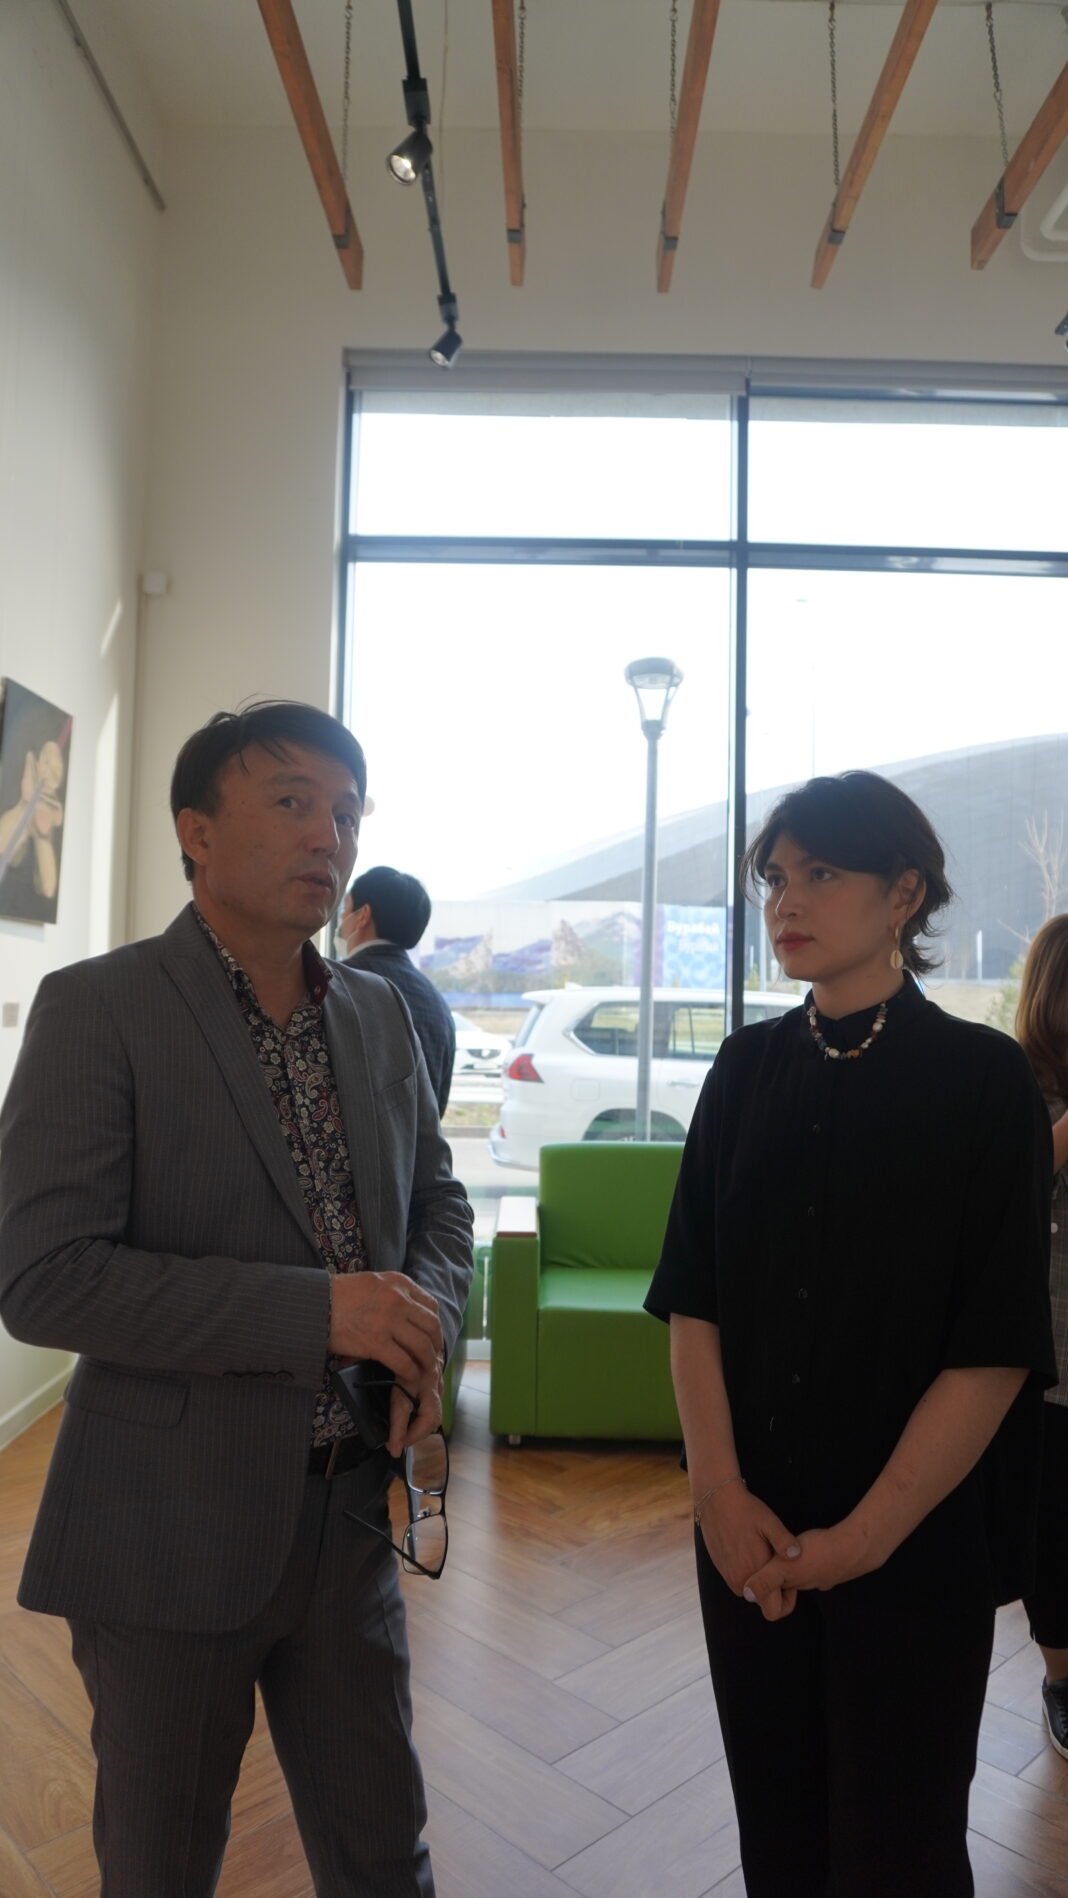 The Lines of Prosperity: Kazakh minimalism and academism in a new exhibition